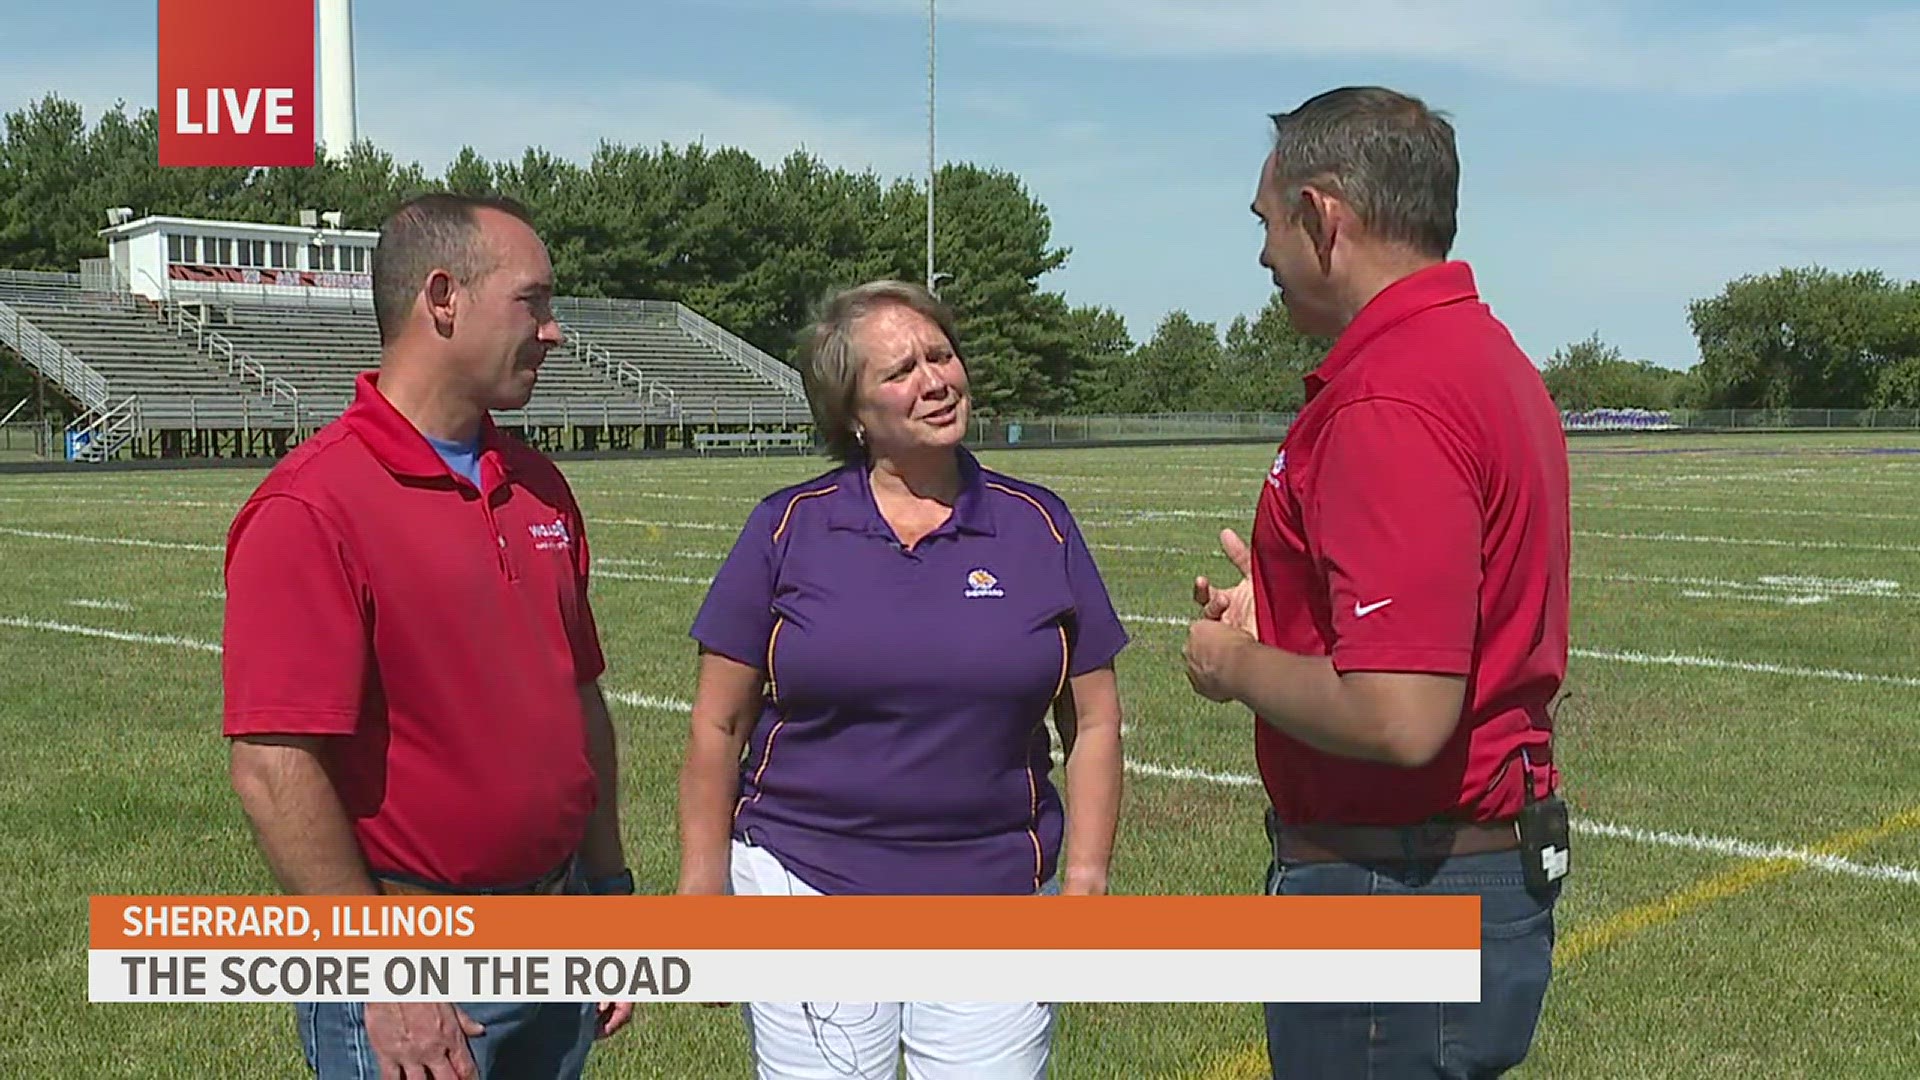 News 8's sports crew is out at Sherrard High School weighing the odds between the upcoming Sherrard v. Rock Ridge game with the Sherrard athletic director.